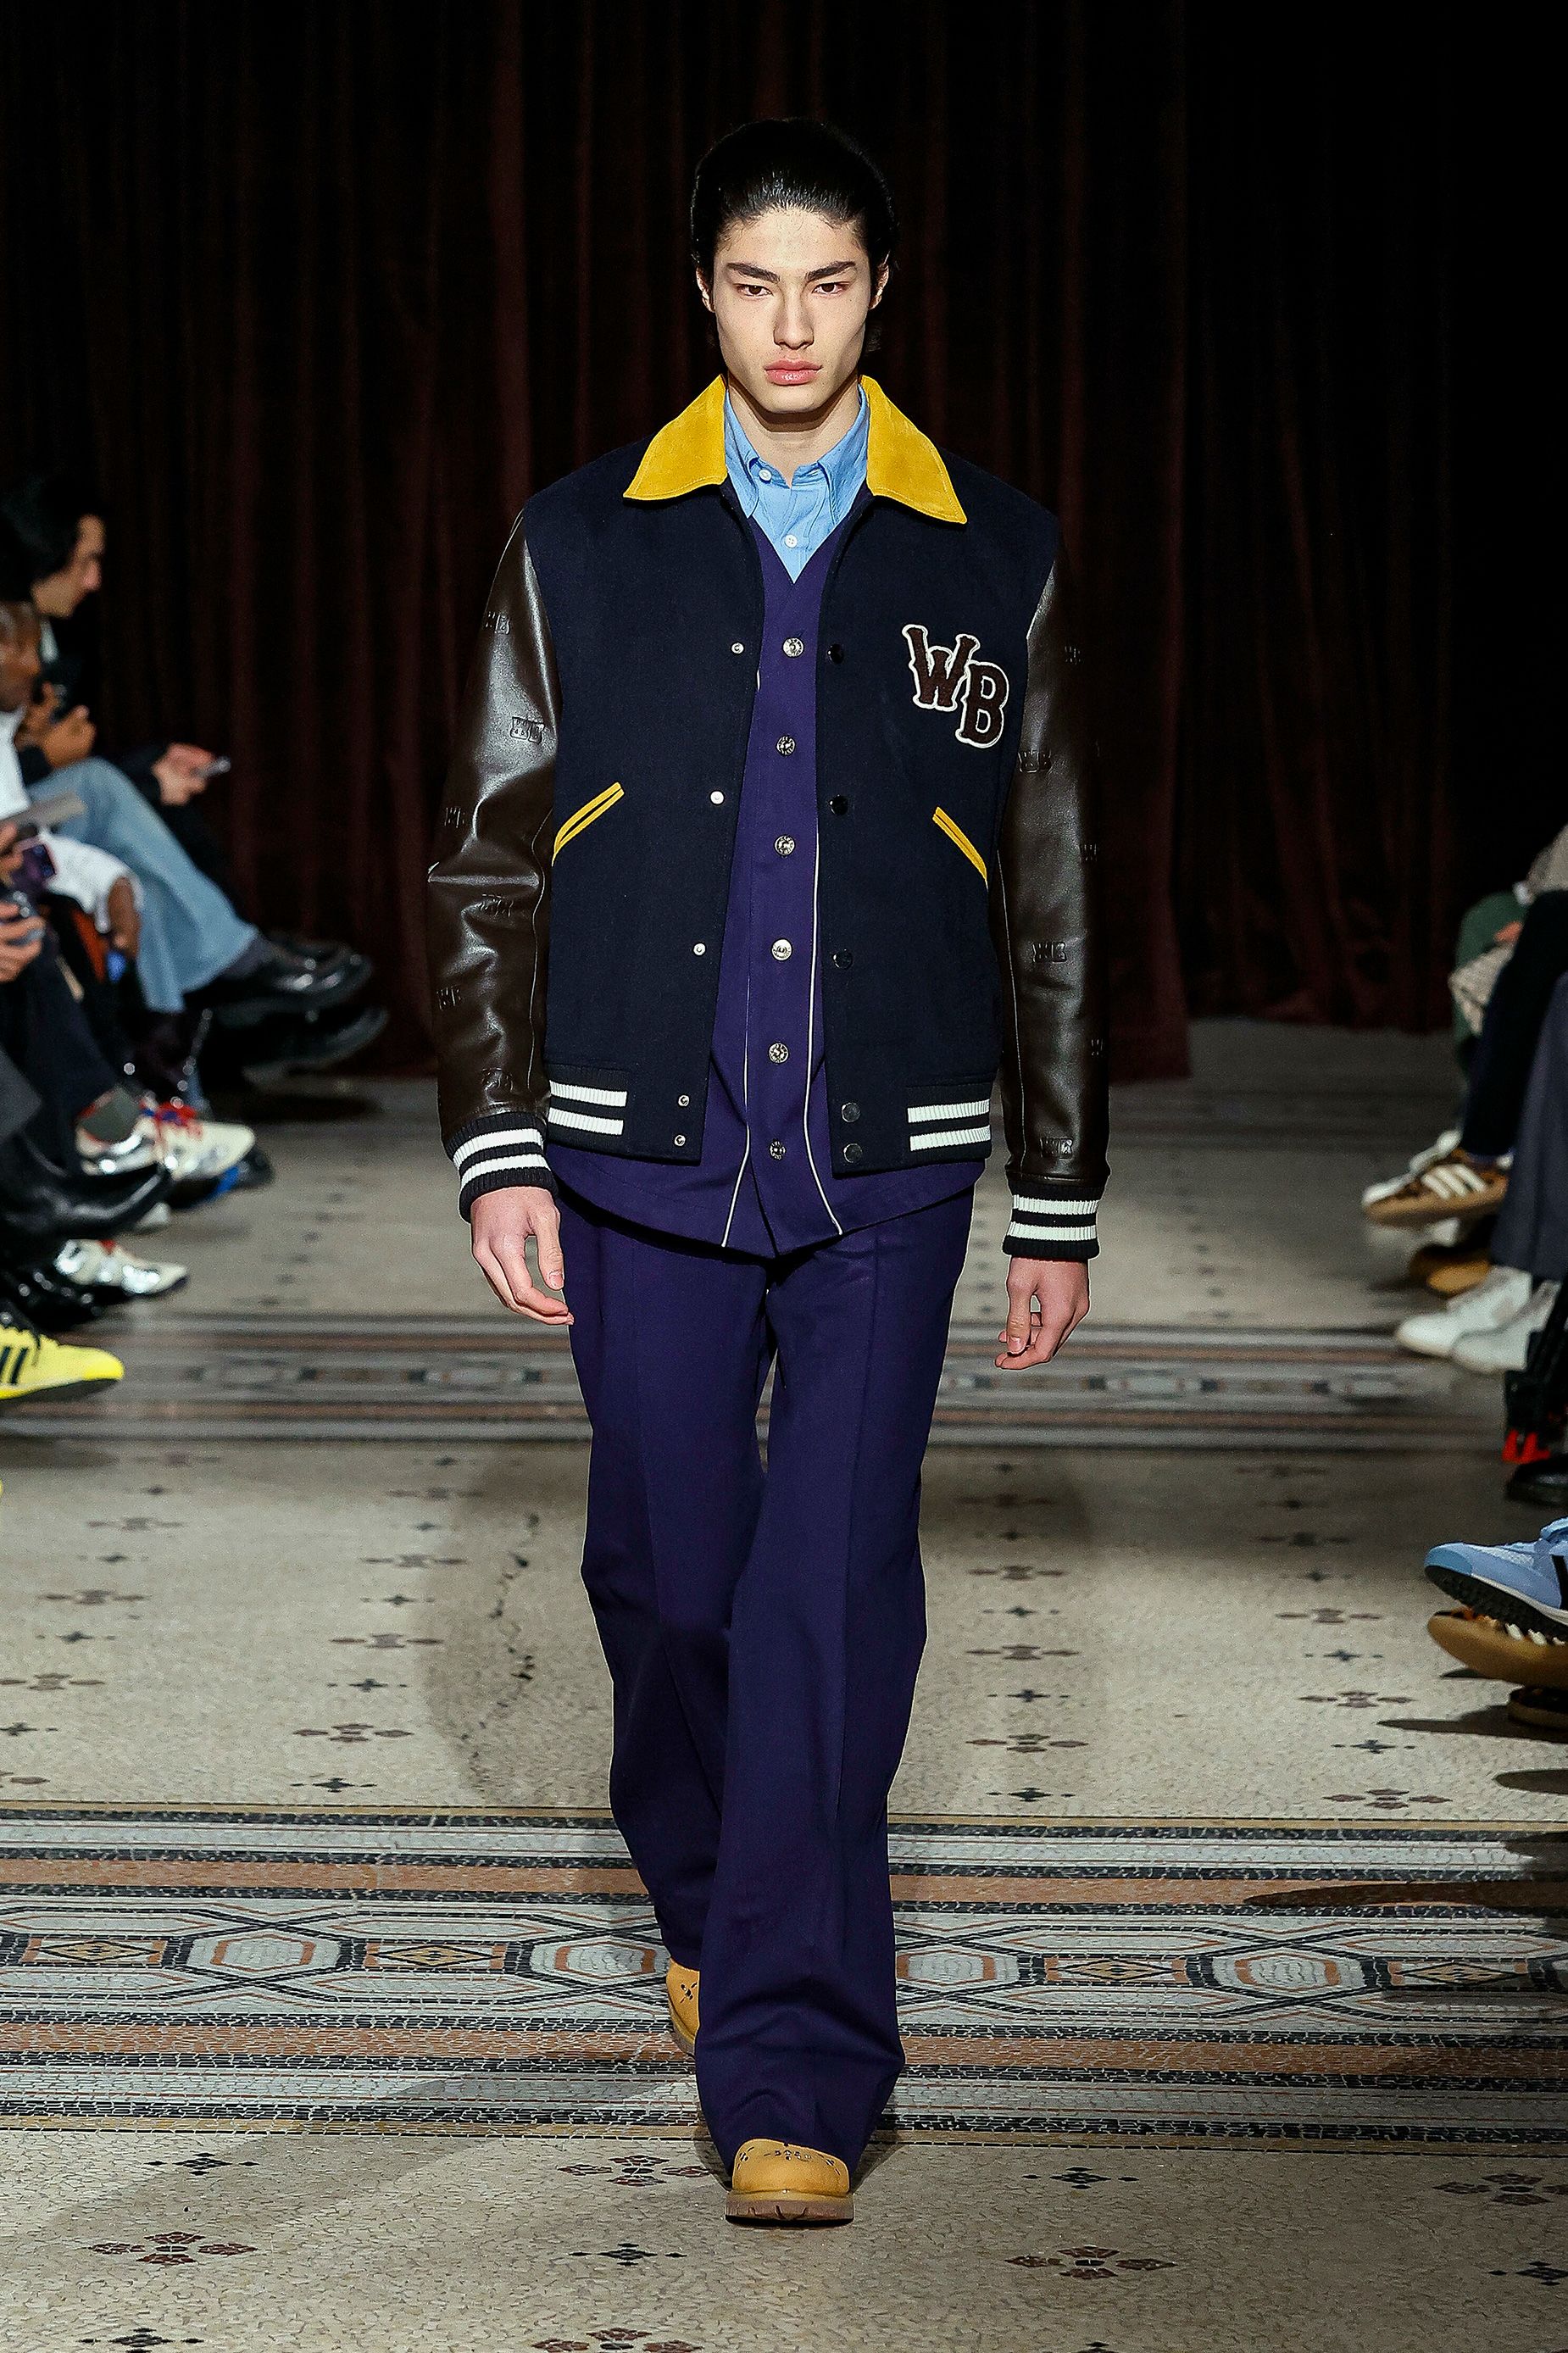 Wales Bonner's collection featured varsity jackets and crew sweaters inspired by American colleges.